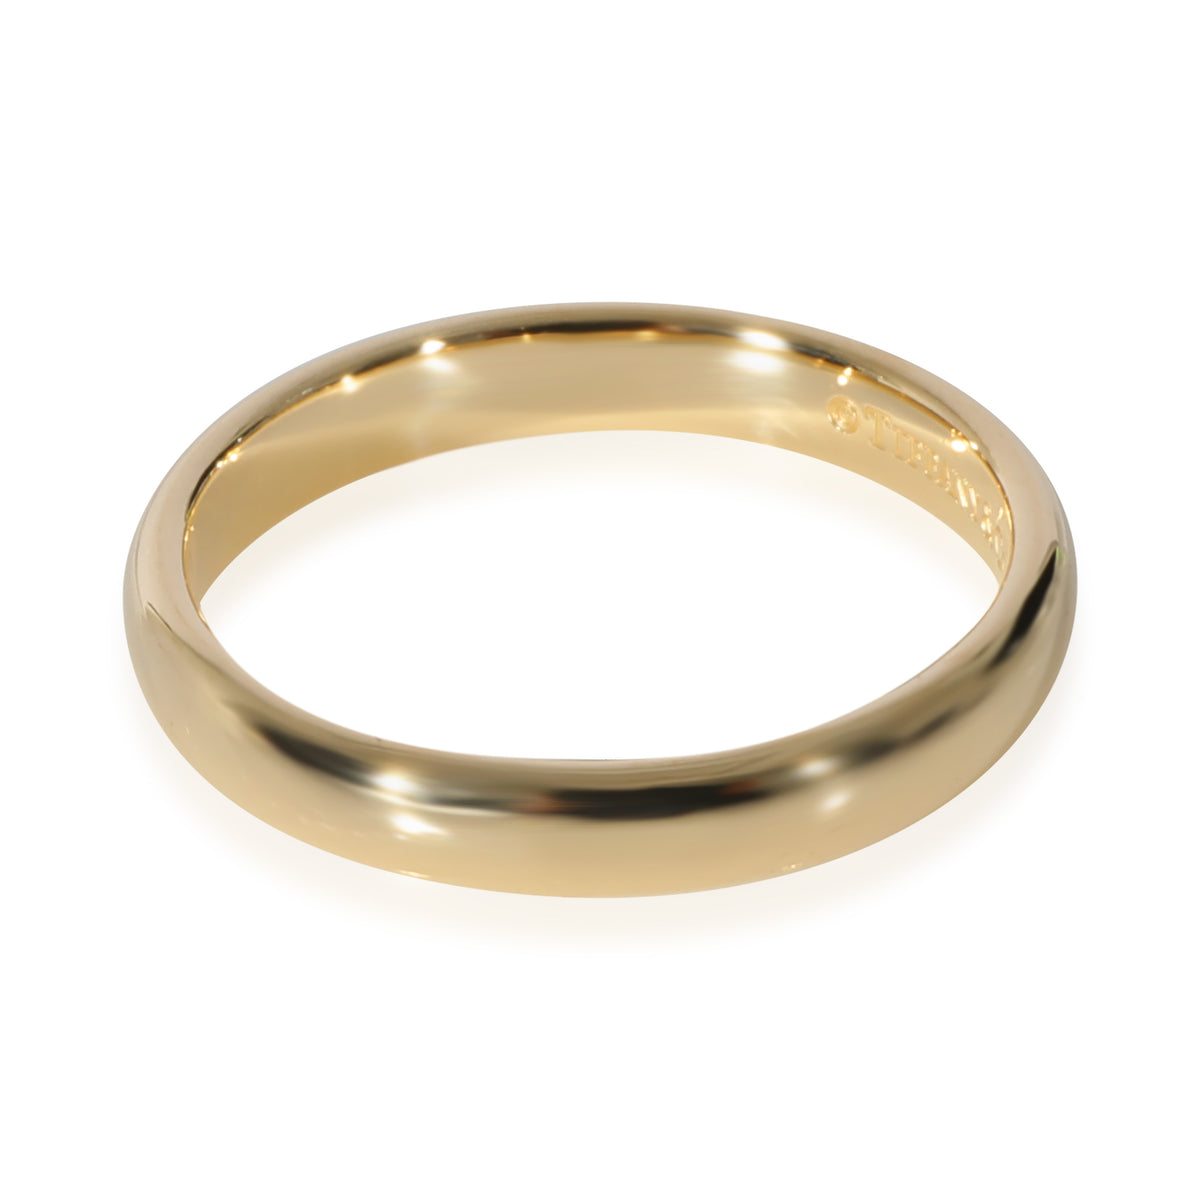 Tiffany & Co. Tiffany Forever Wedding Band in 18k Yellow Gold